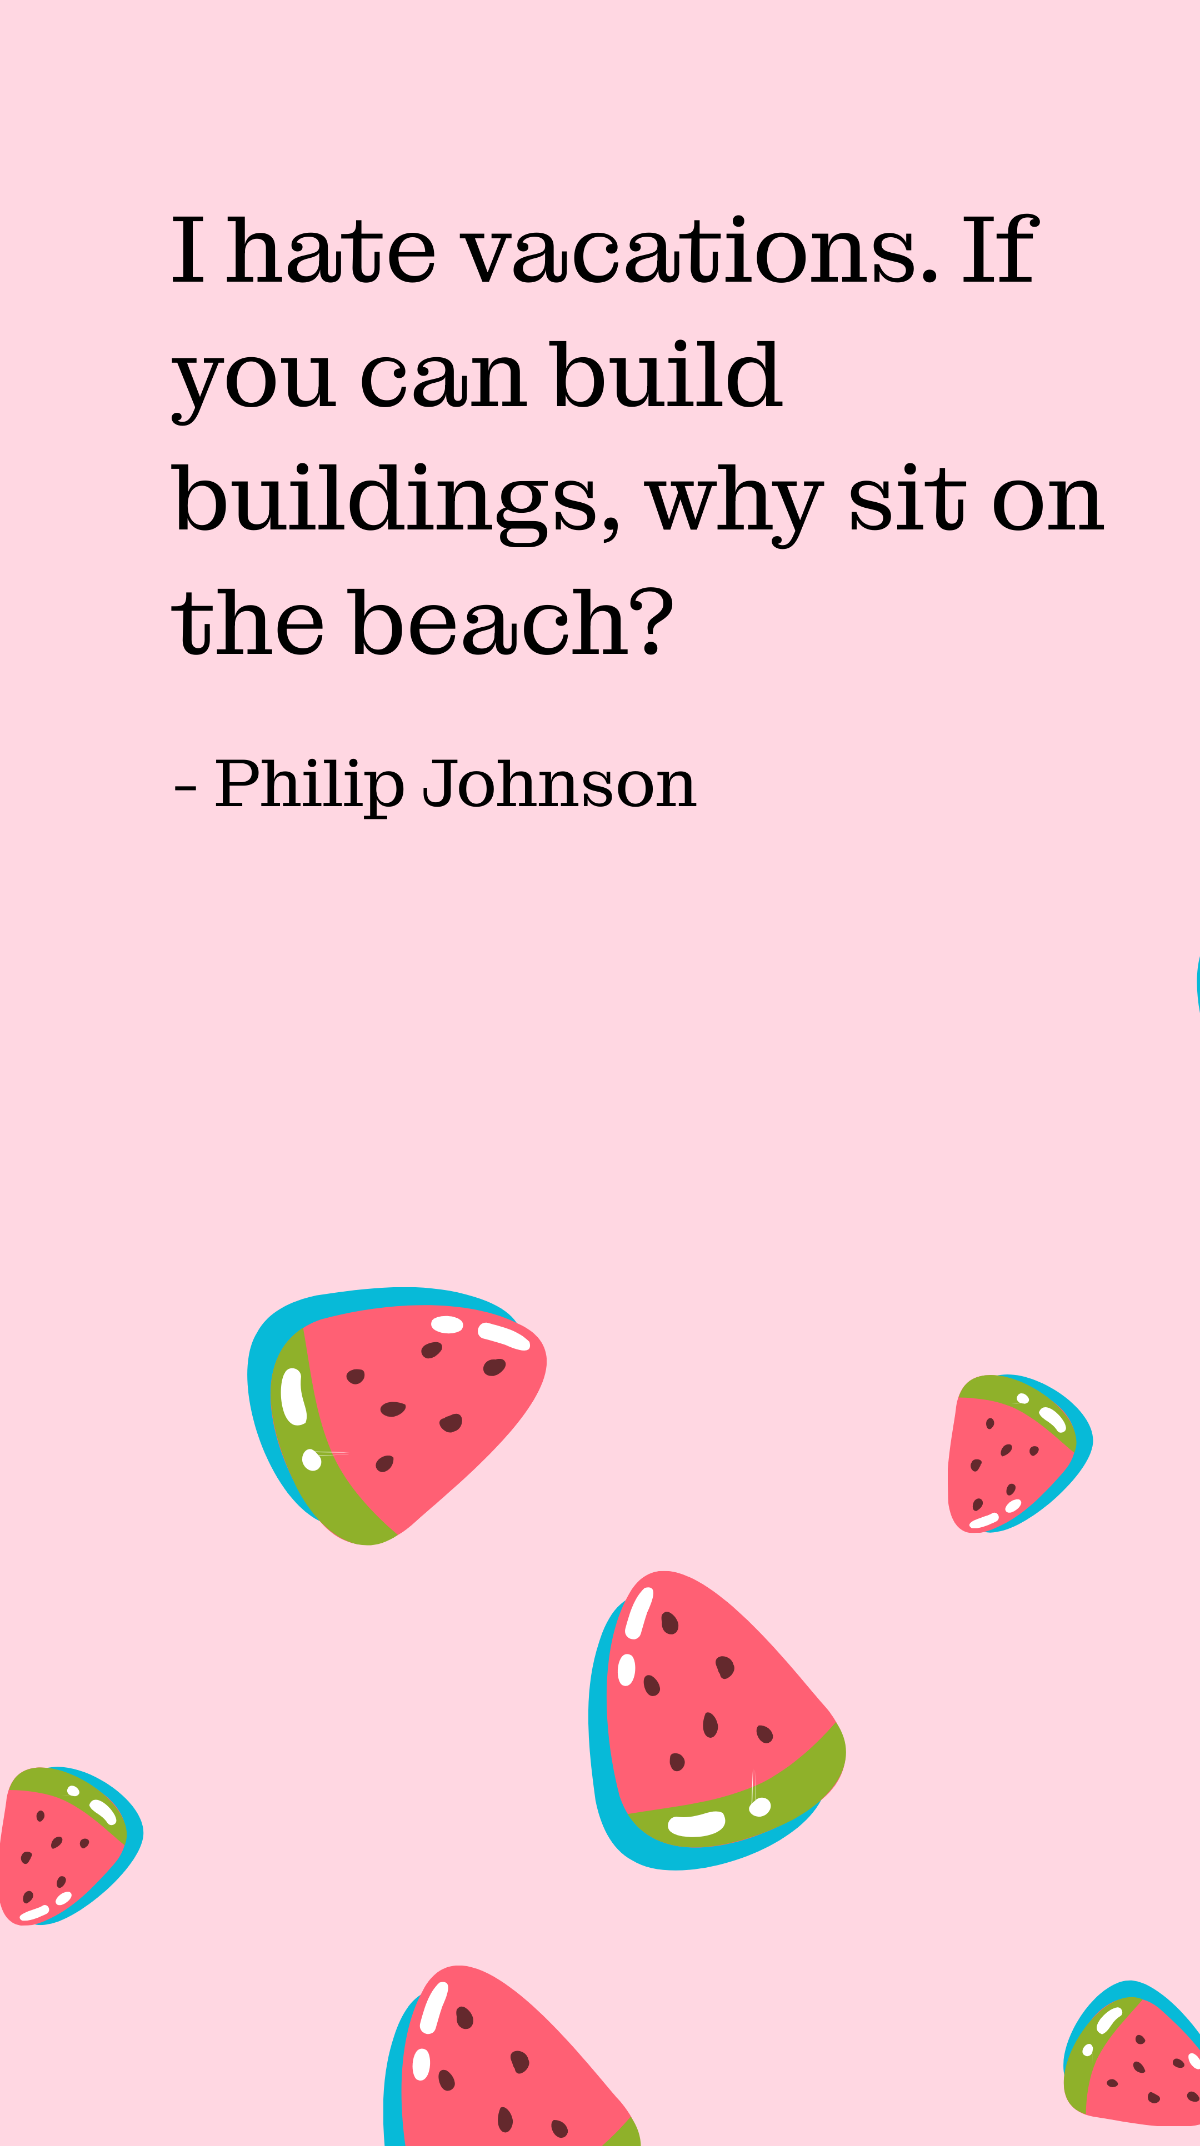 Philip Johnson - I hate vacations. If you can build buildings, why sit on the beach? Template